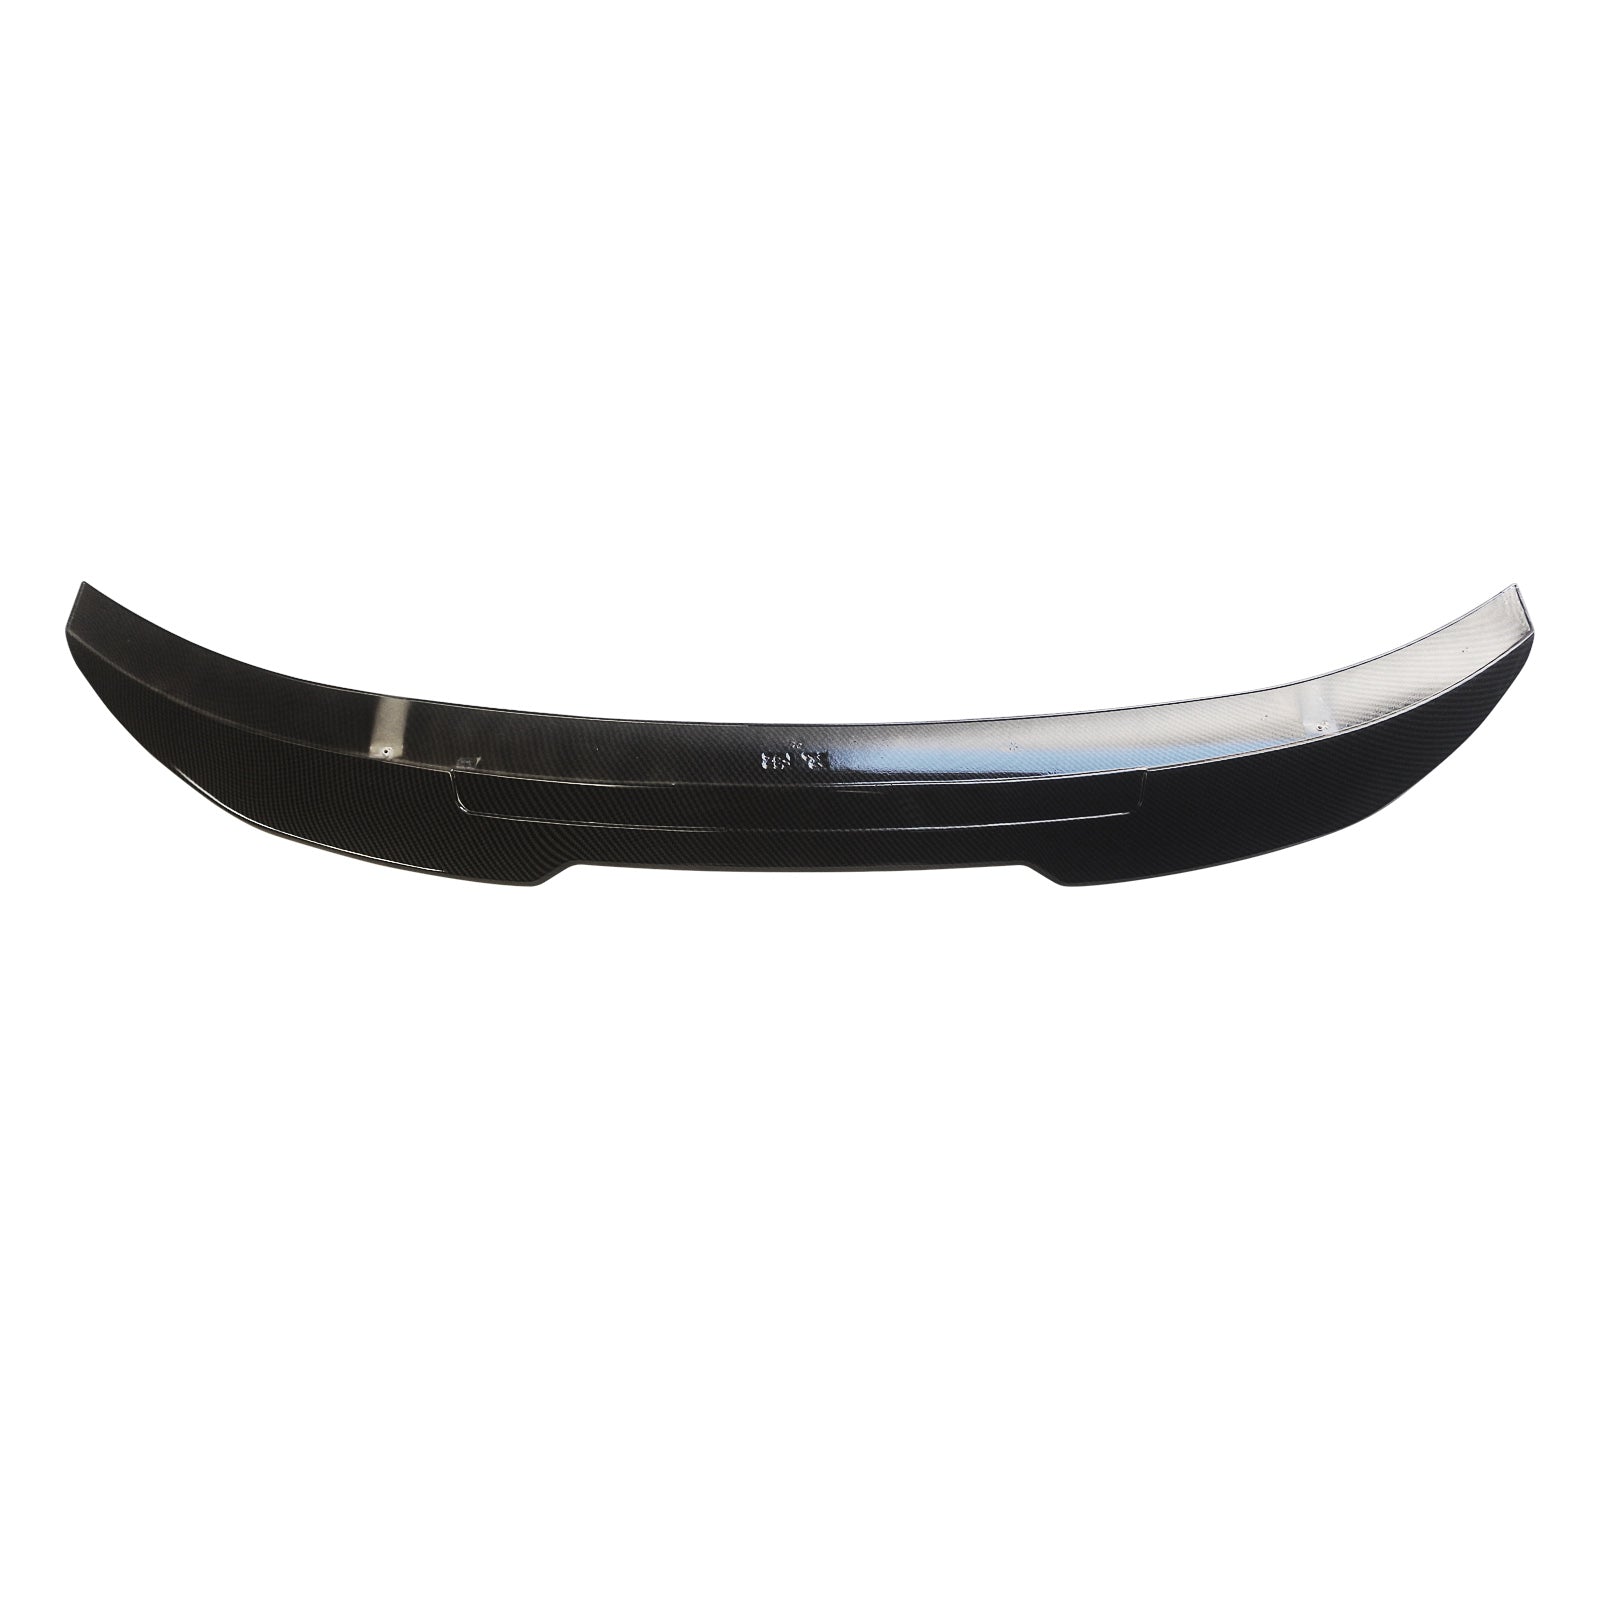 MMOMOTORSPORT Rear Spoiler For BMW 4 Series F32 Coupe 2 Door PSM Style Trunk Wing Air Dam Splitter